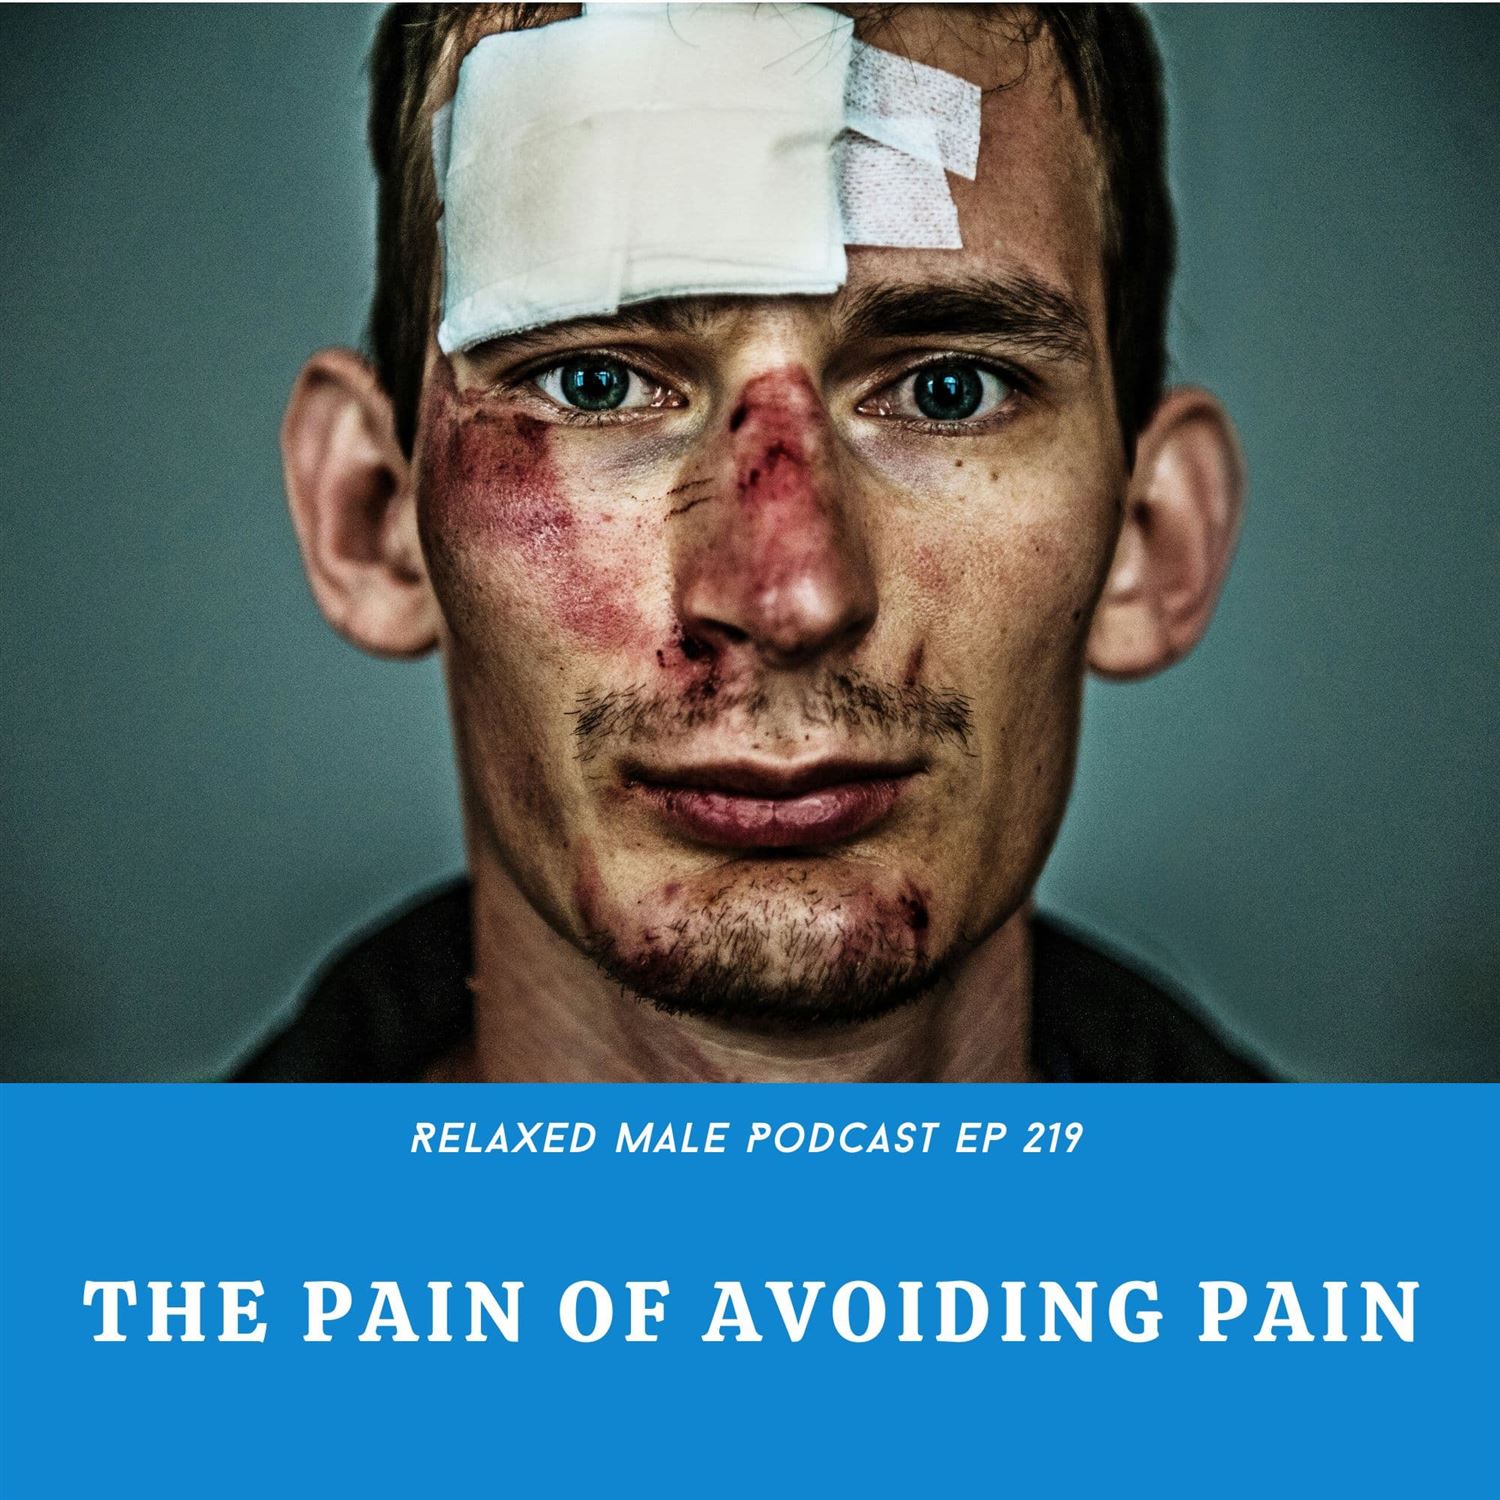 Avoiding Pain Isn’t Going to Bring You Pleasure